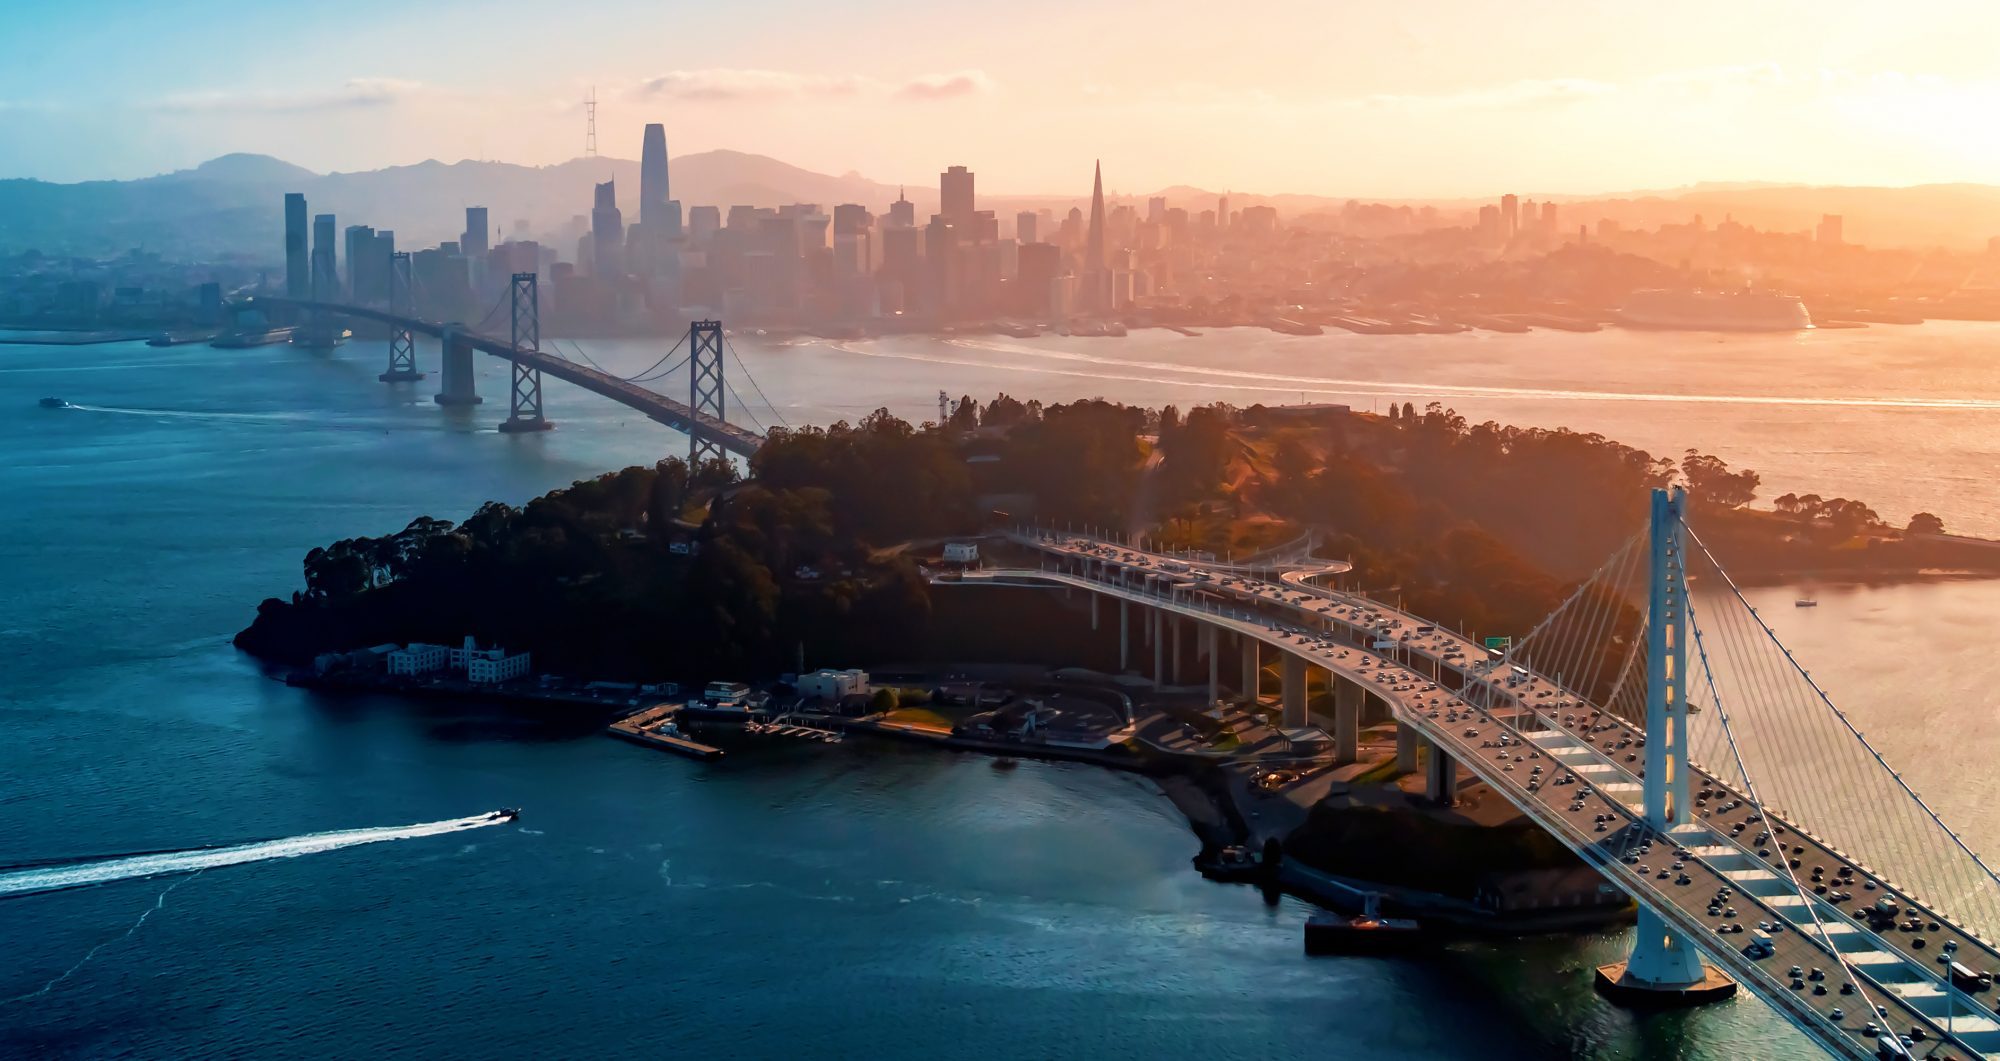 An aerial view of the Bay Bridge in San Francisco. If you need a San Rafael medical leave lawyer, call The Law Office of Jeannette Vaccaro.